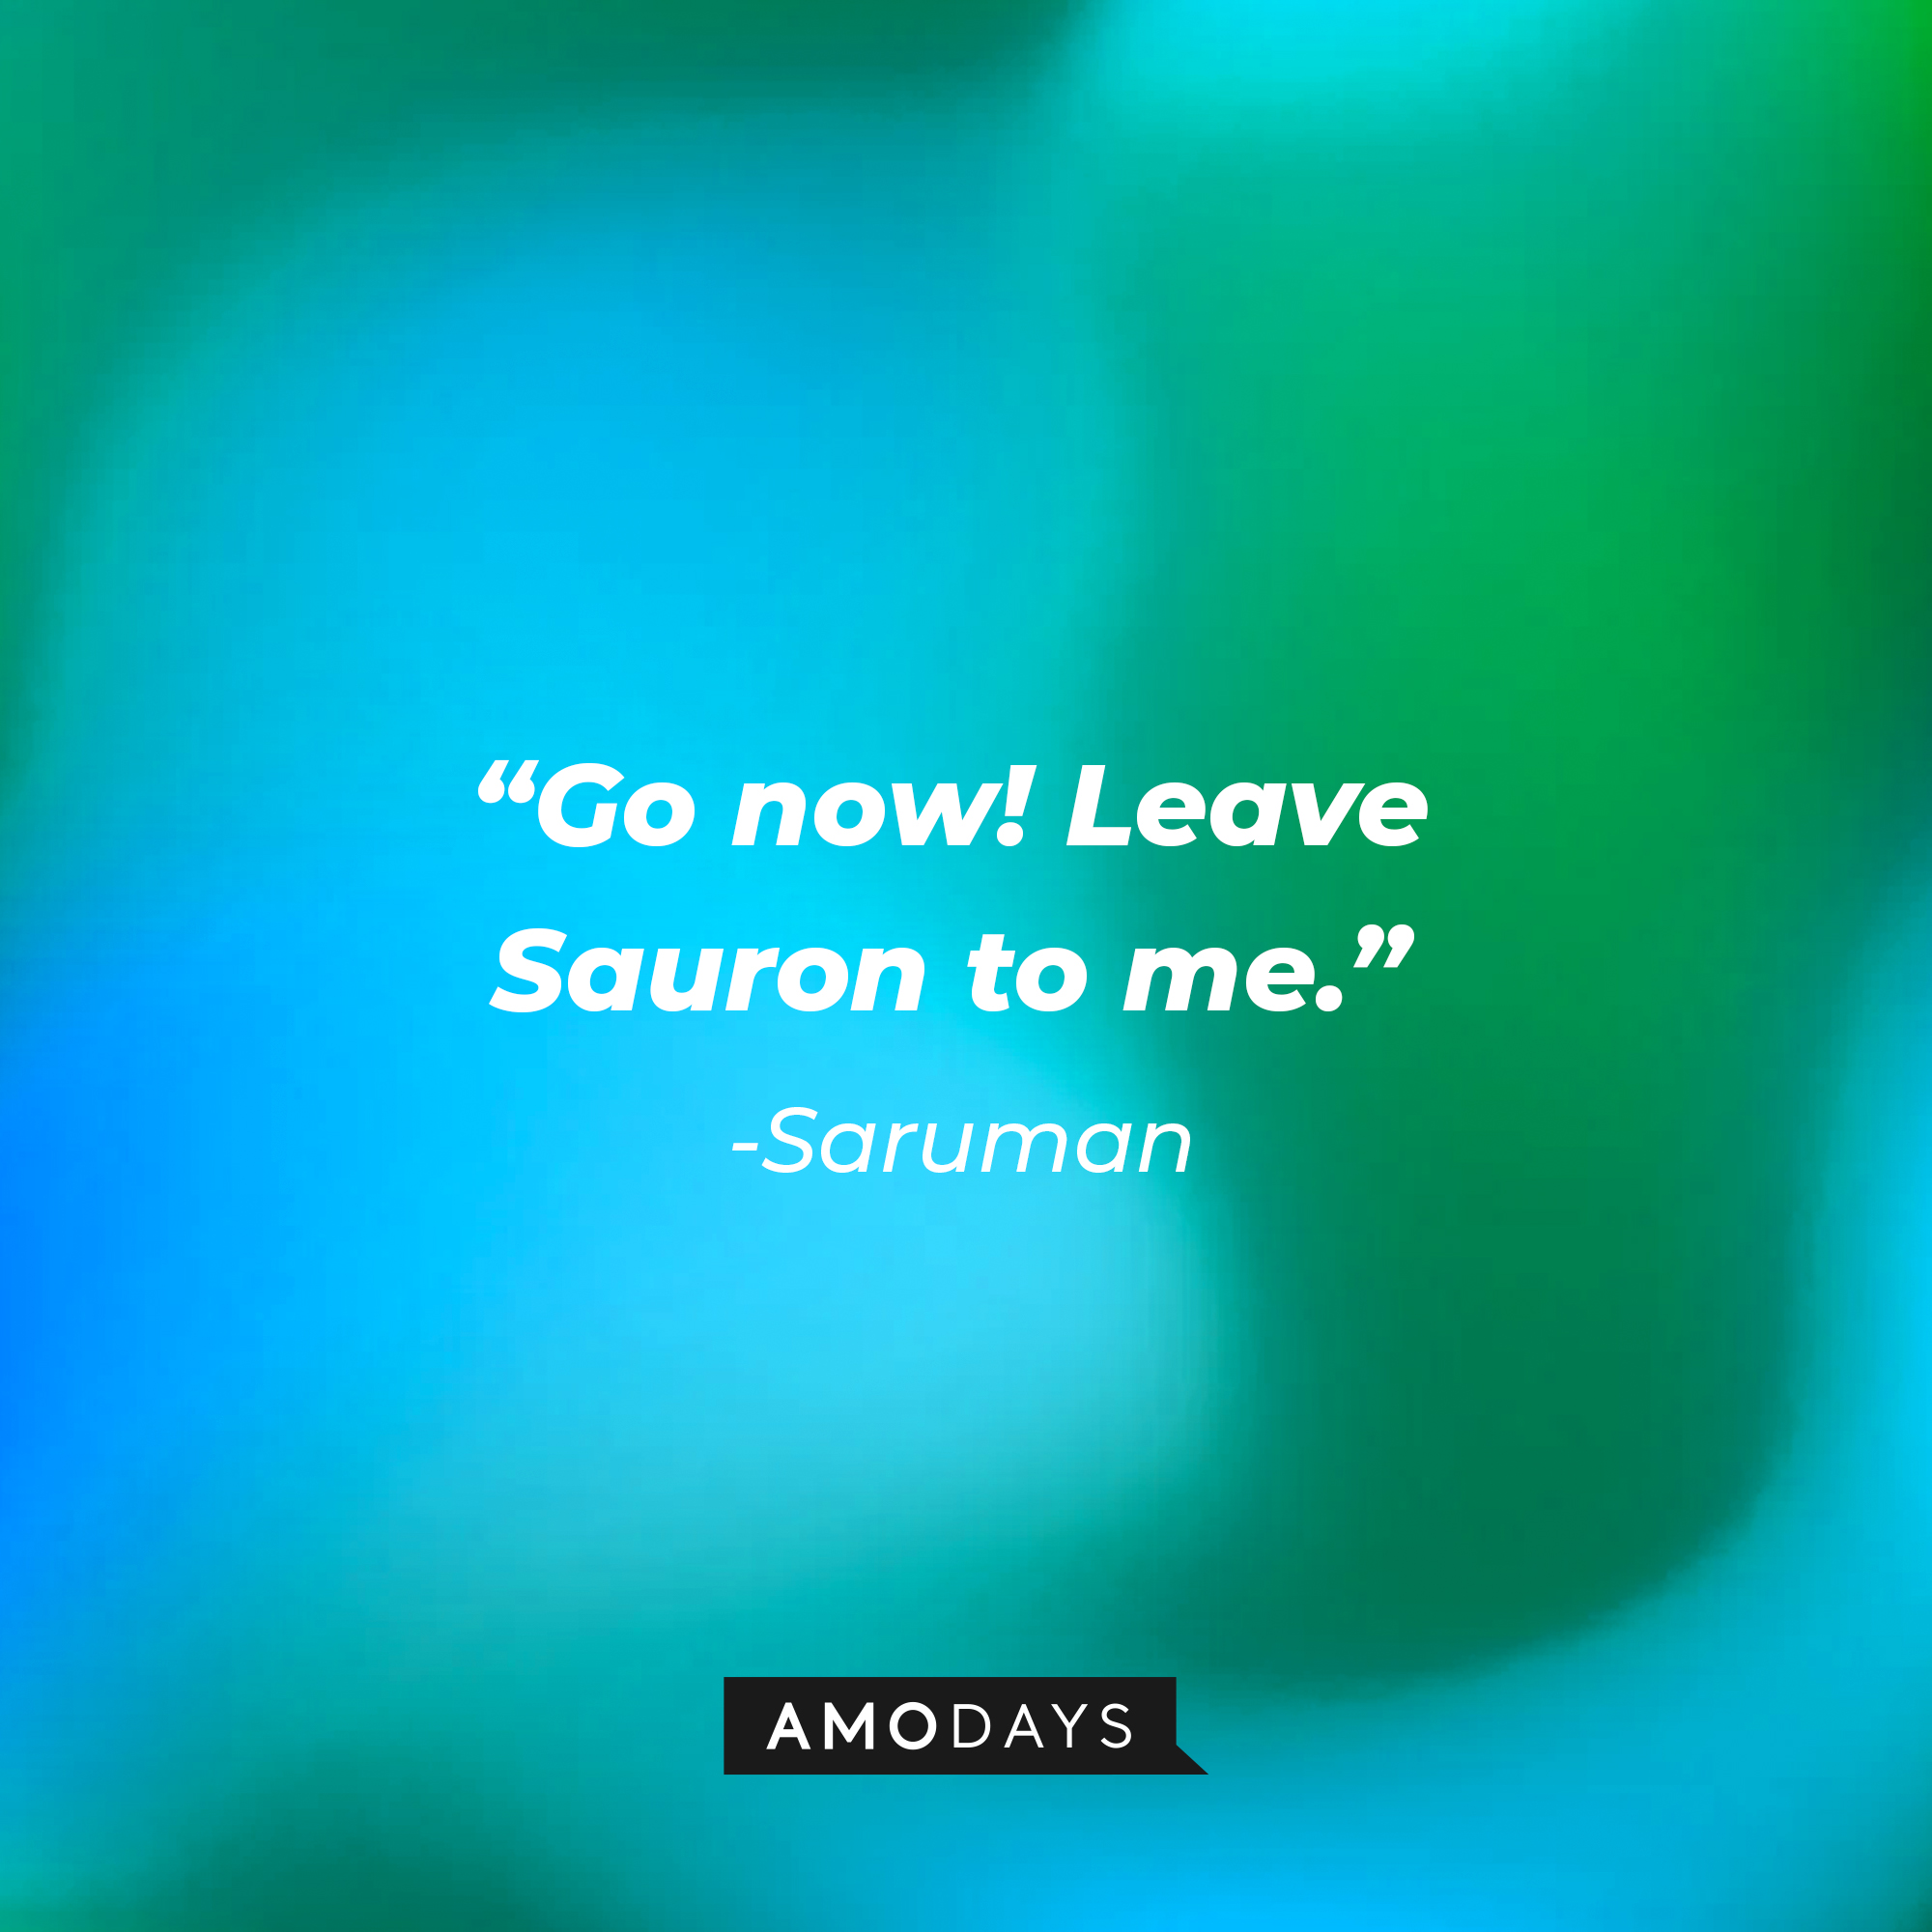 Saruman's quote: “Go now! Leave Sauron to me.” | Source: Amodays